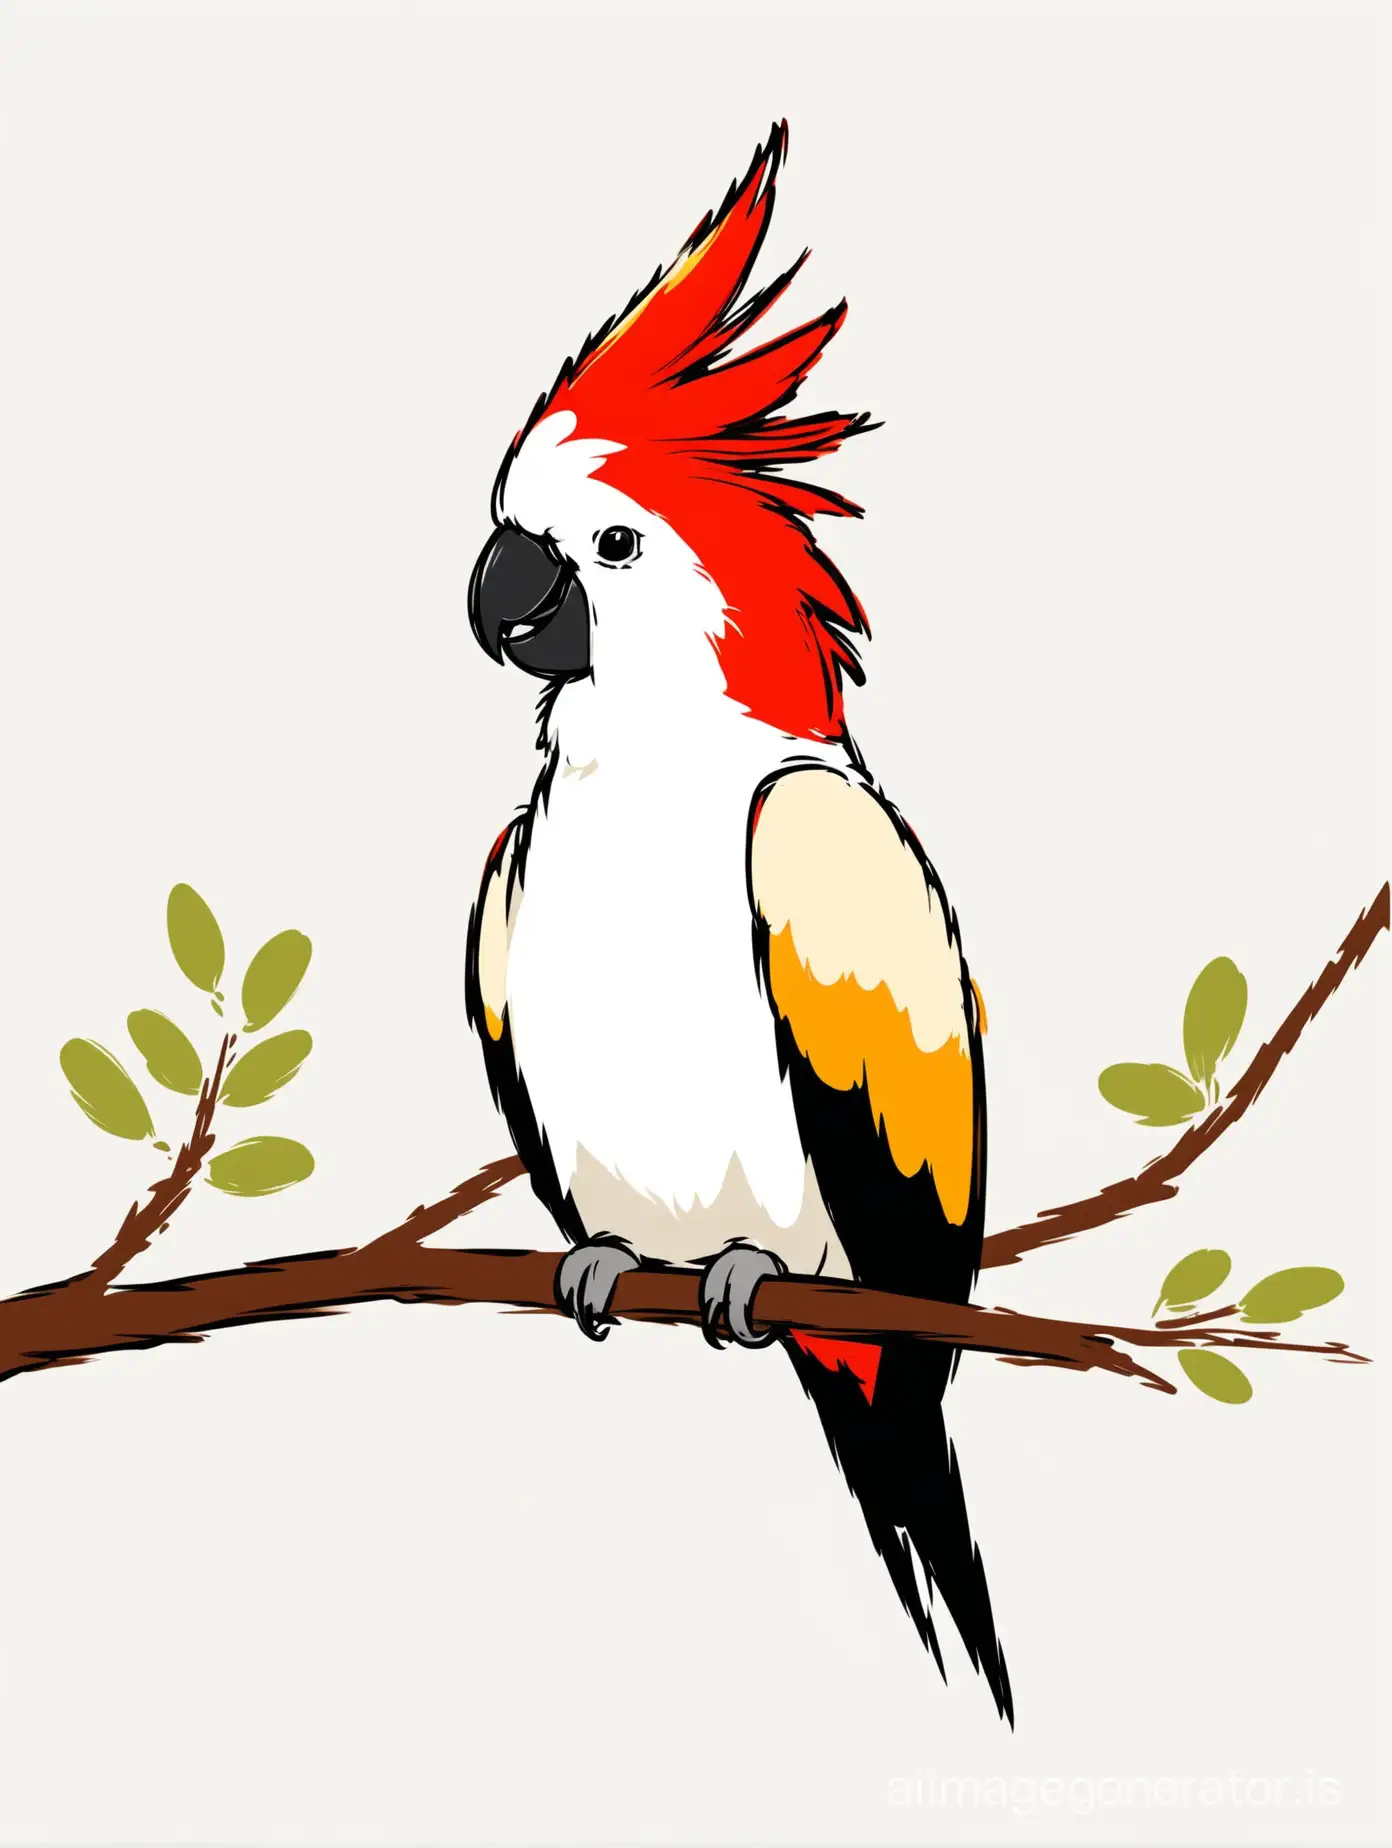 A multicolored cockatoo with a red crest sits on a branch in profile, a flat line illustration on a white background